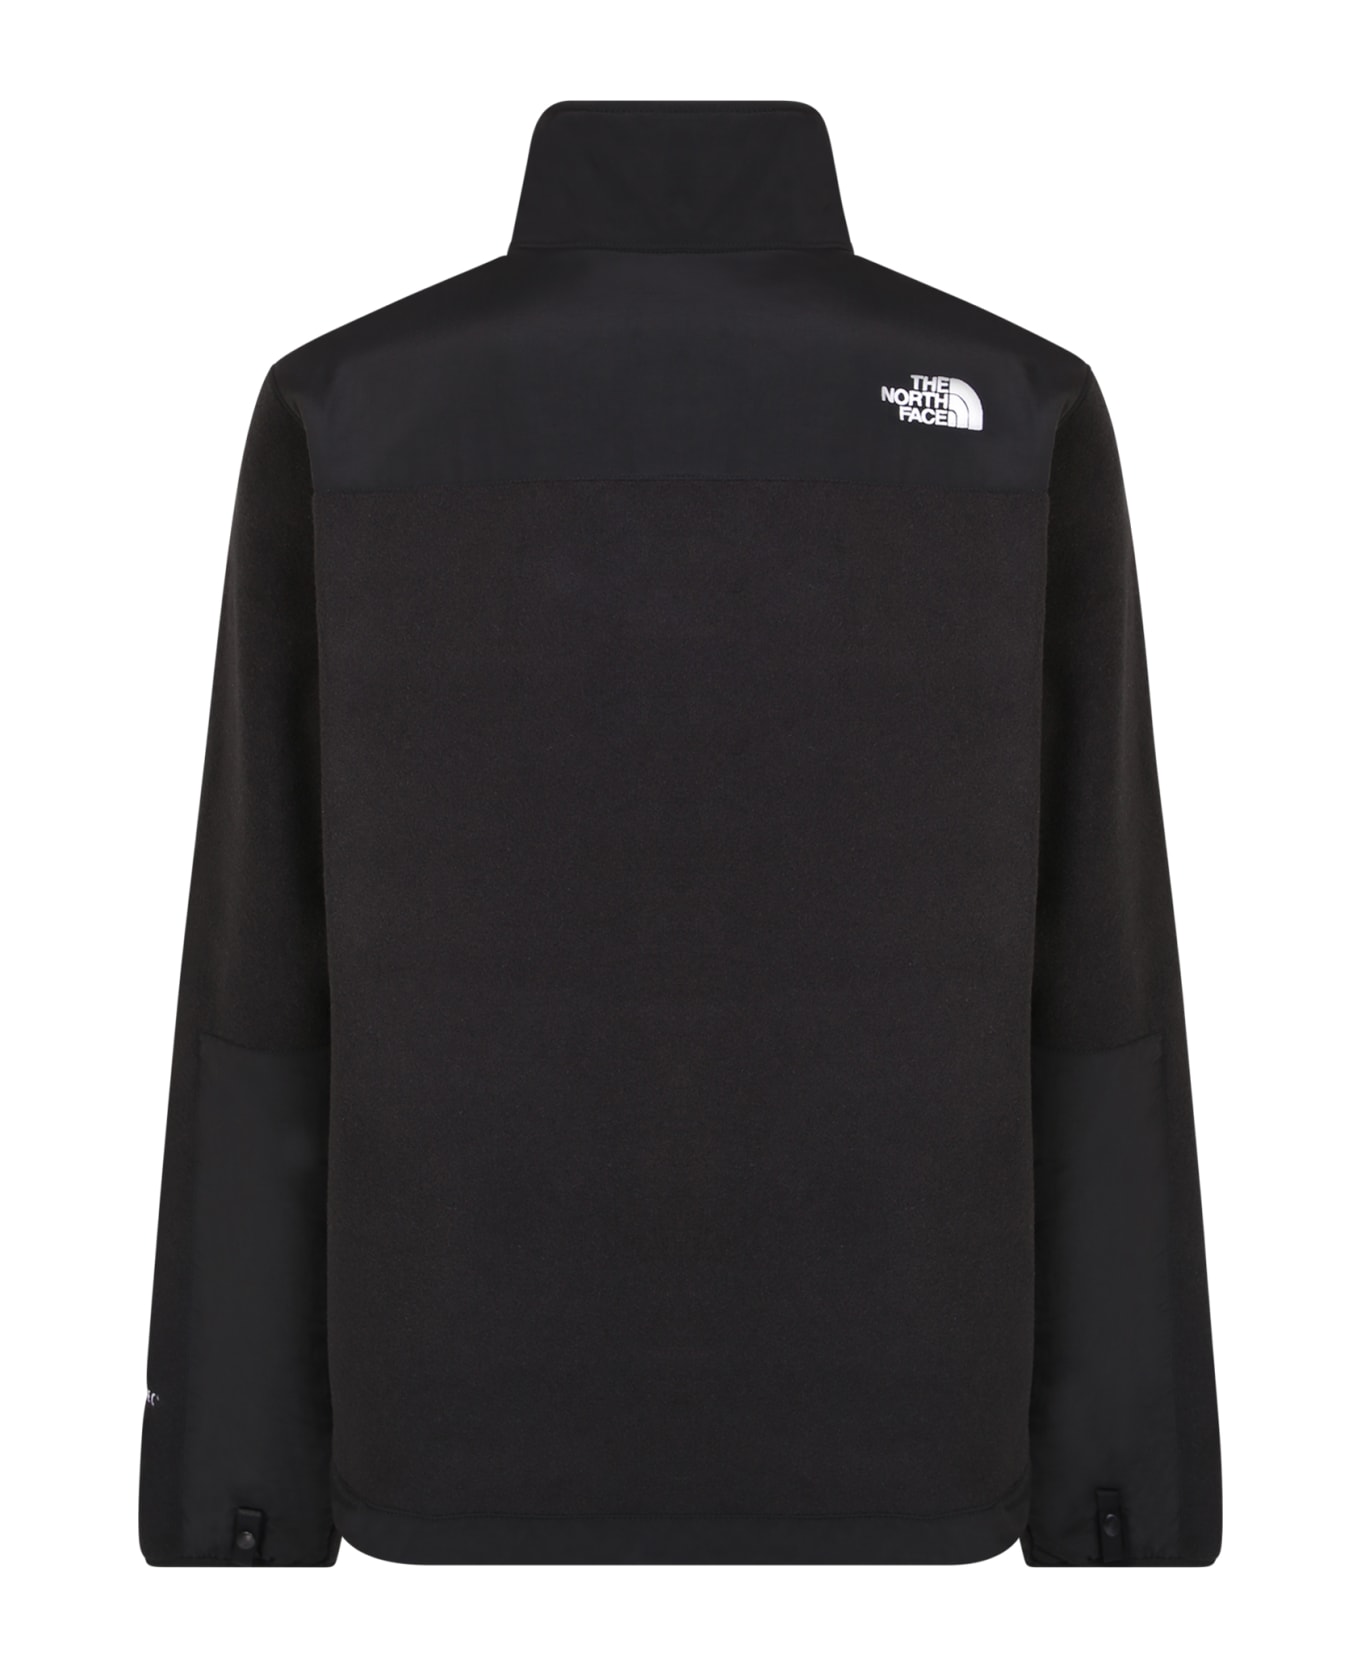 The North Face Fleece Jacket With Iconic Logo Black - Black